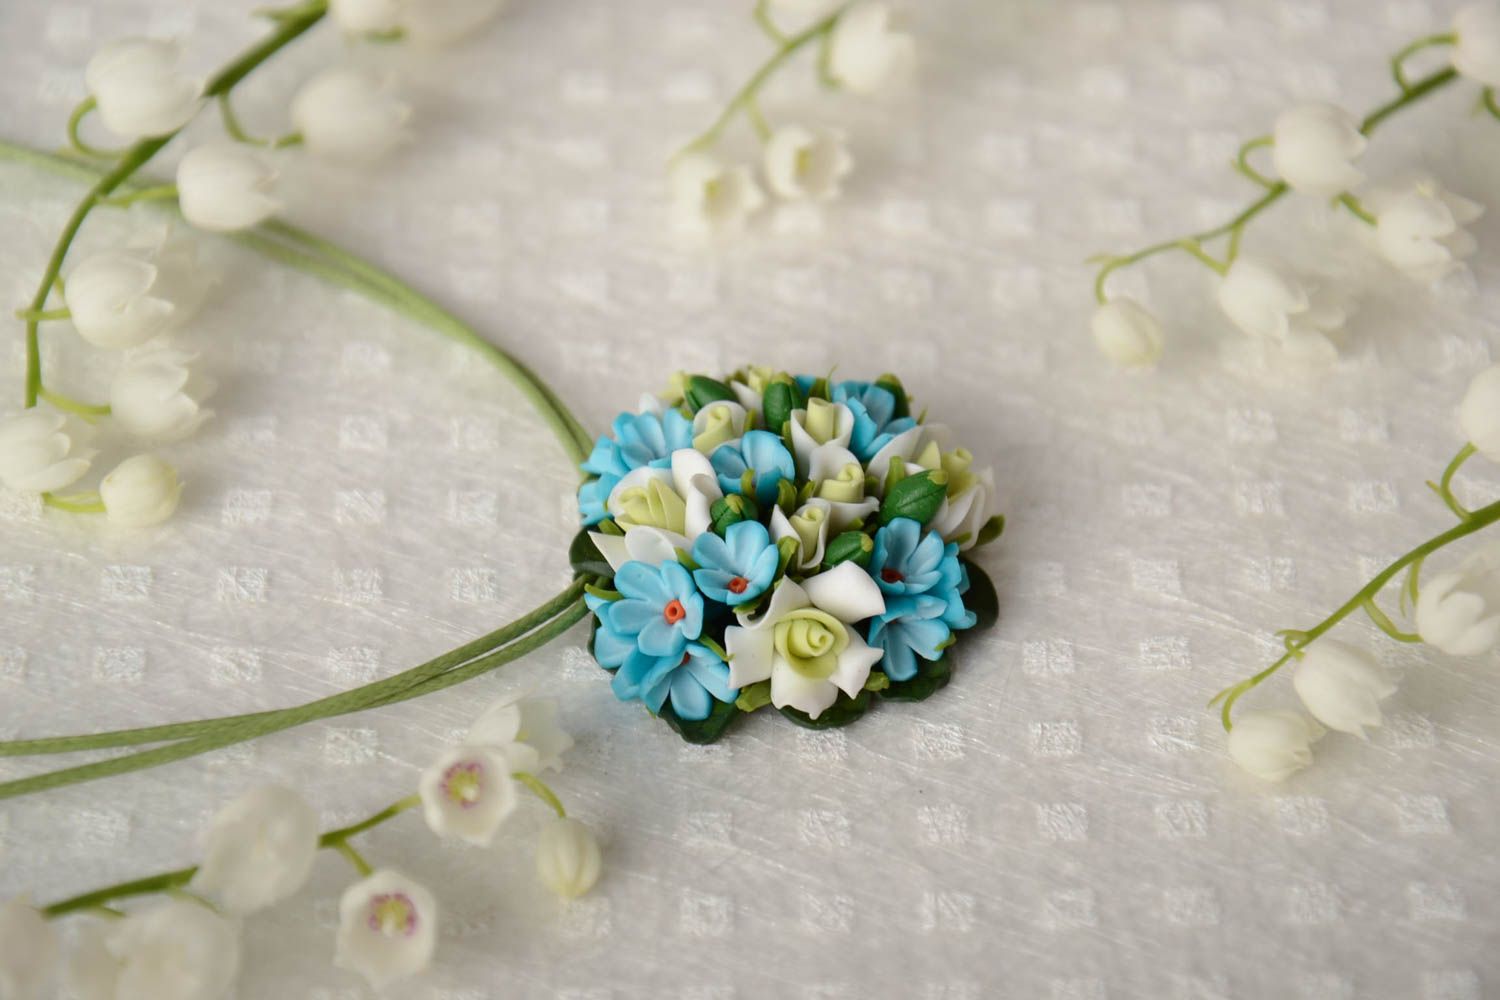 Handmade small round pendant necklace with blue polymer clay flowers on green cord photo 1